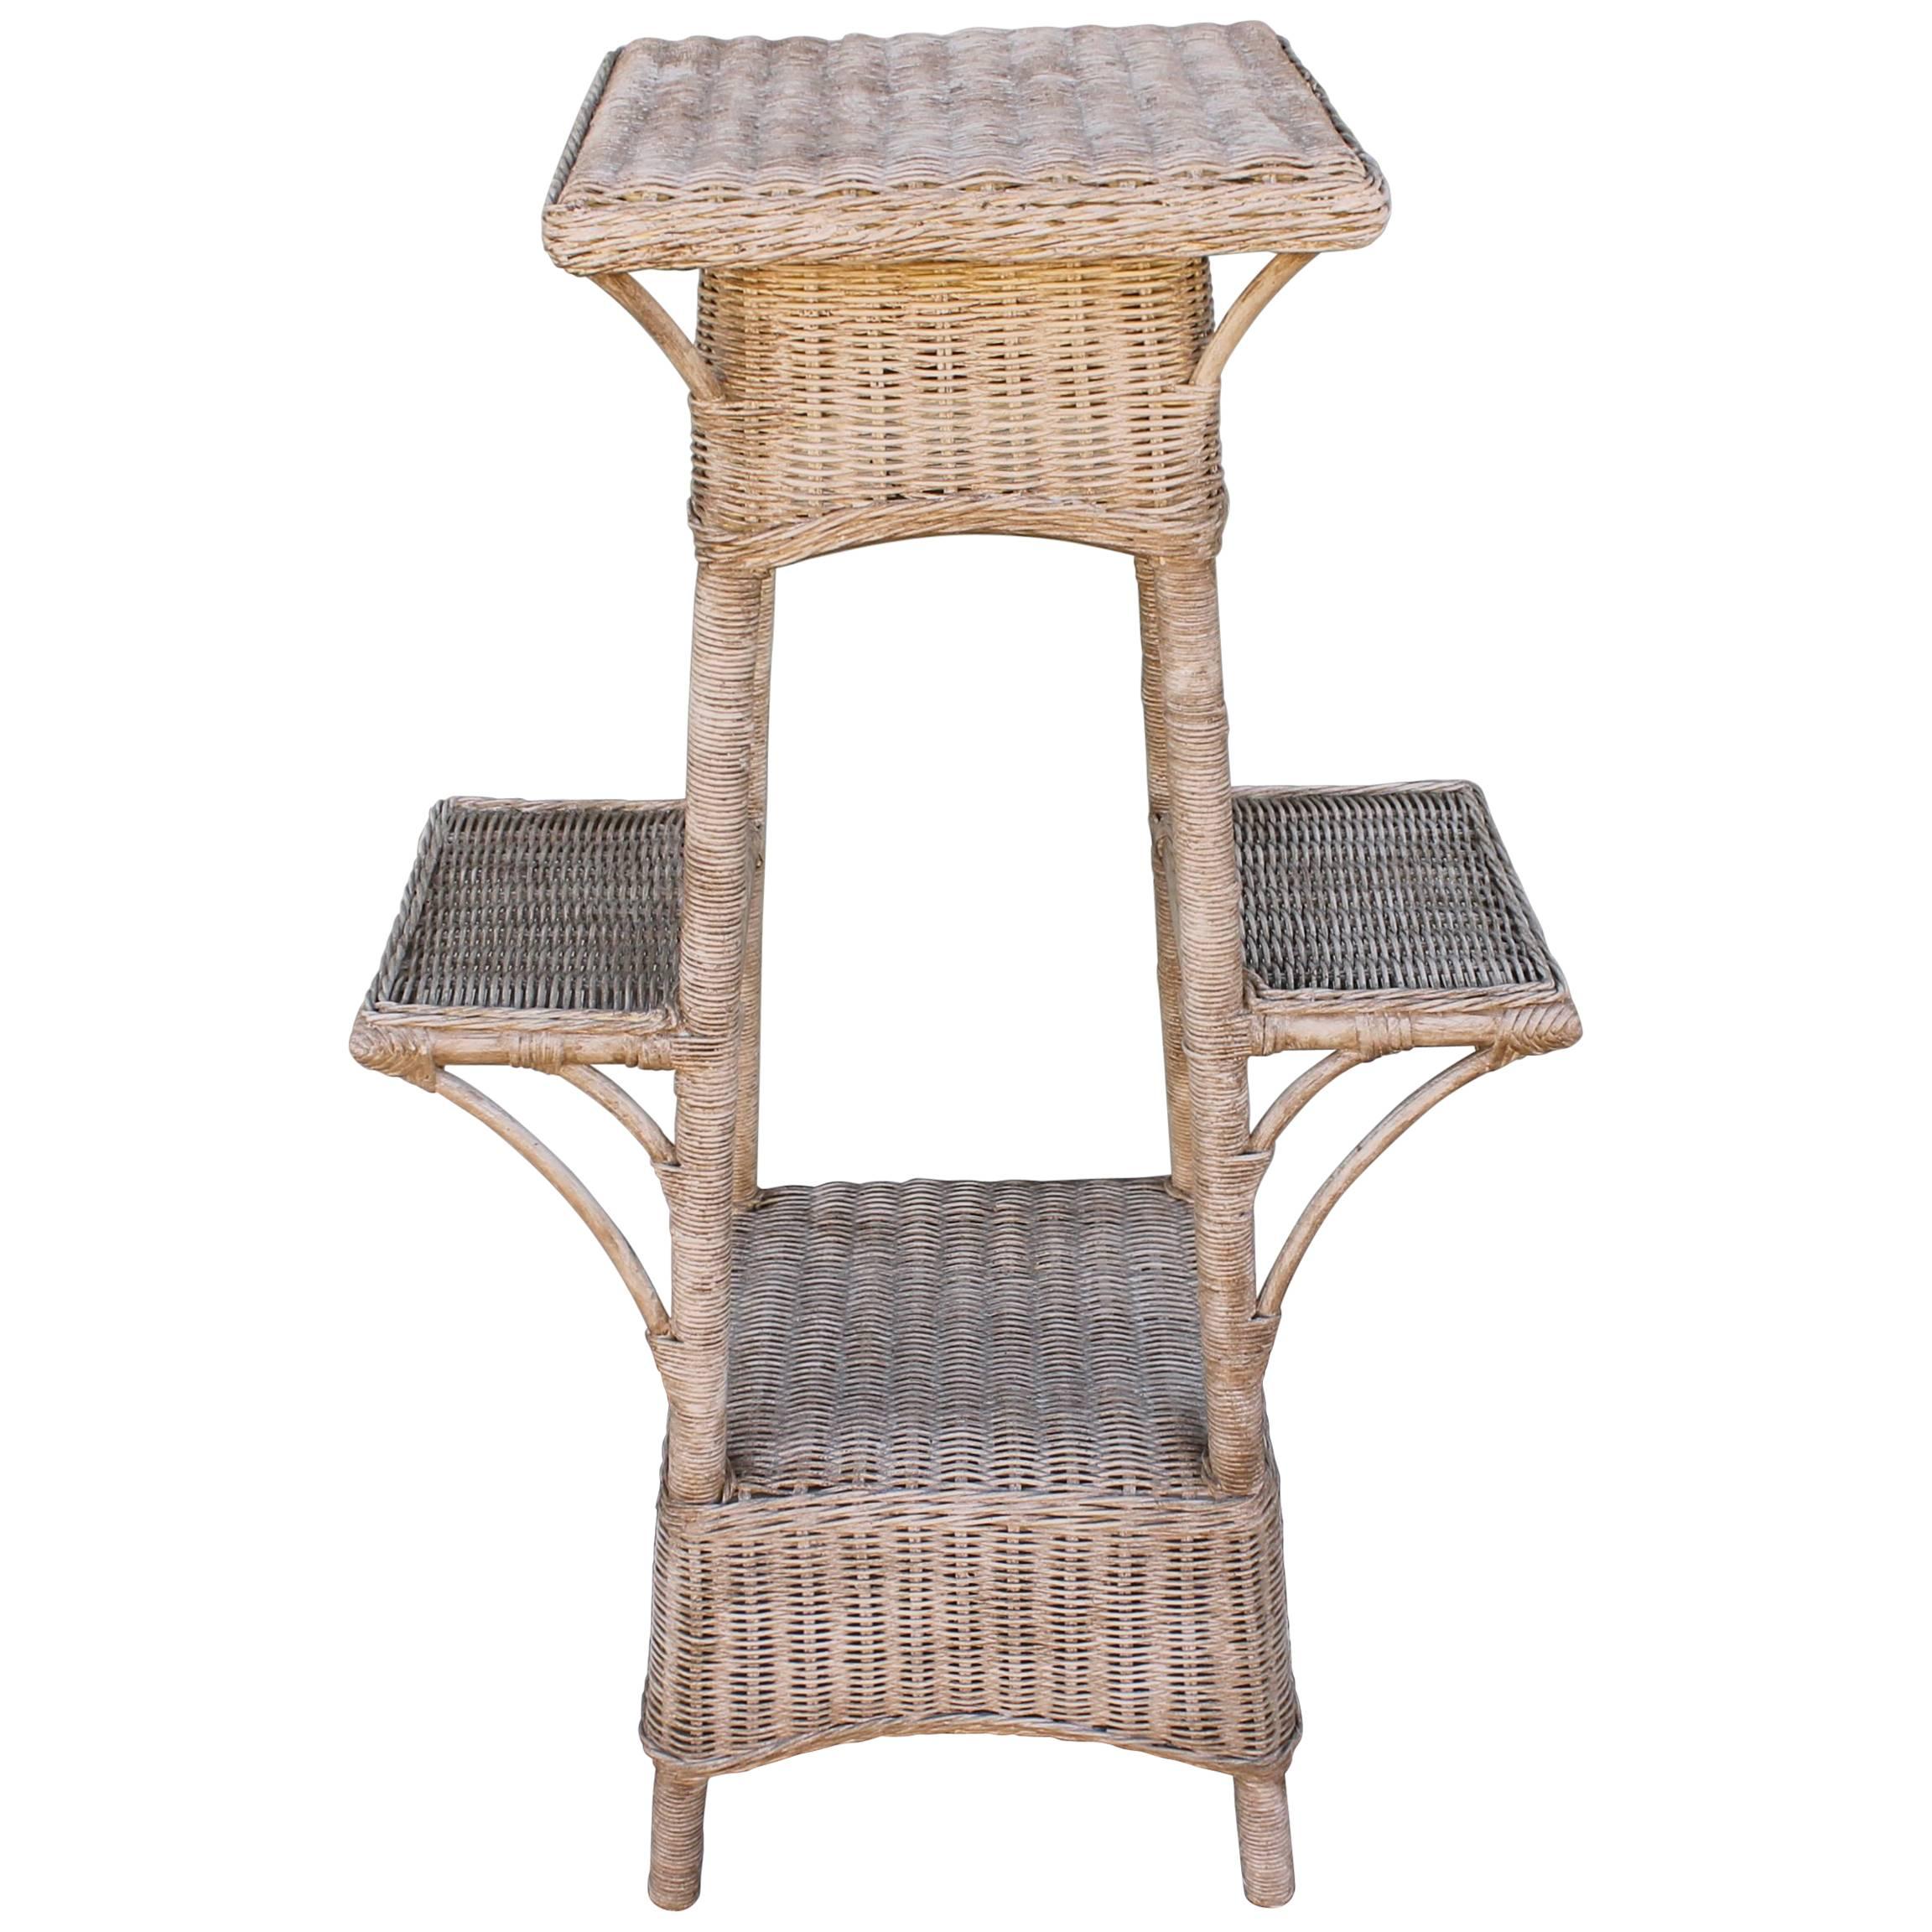 Bar Harbor Country Wicker Plant Stand